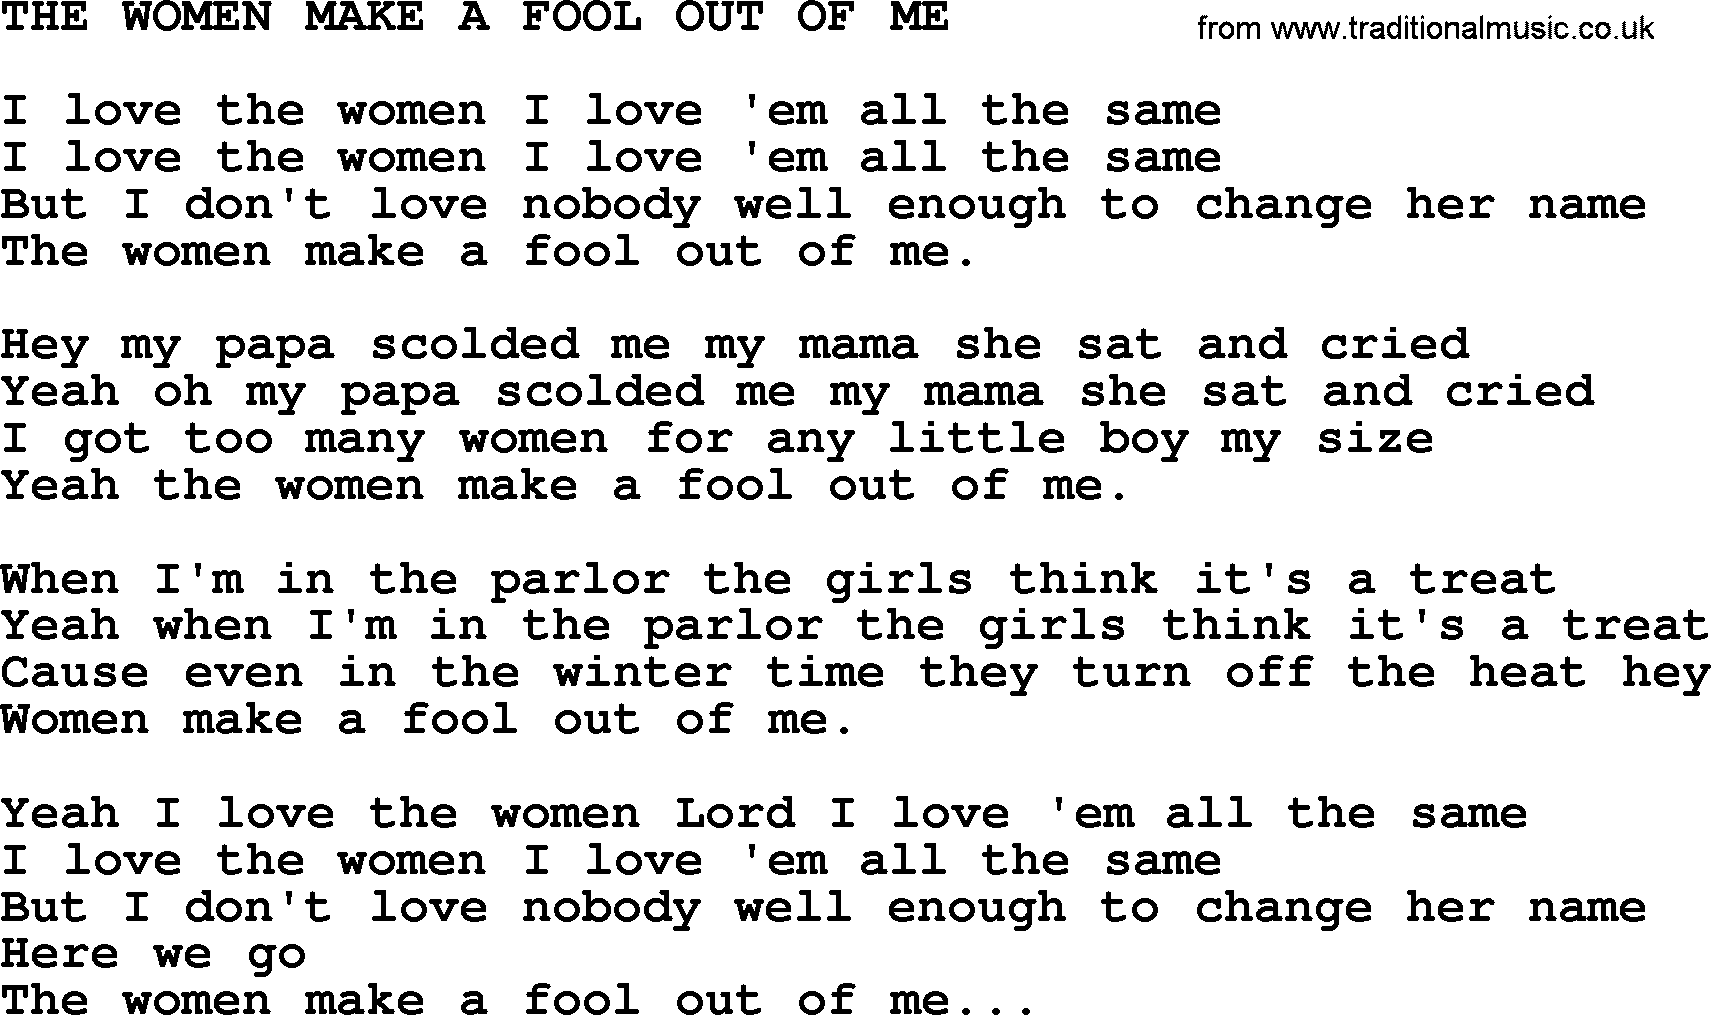 Merle Haggard song: The Women Make A Fool Out Of Me, lyrics.